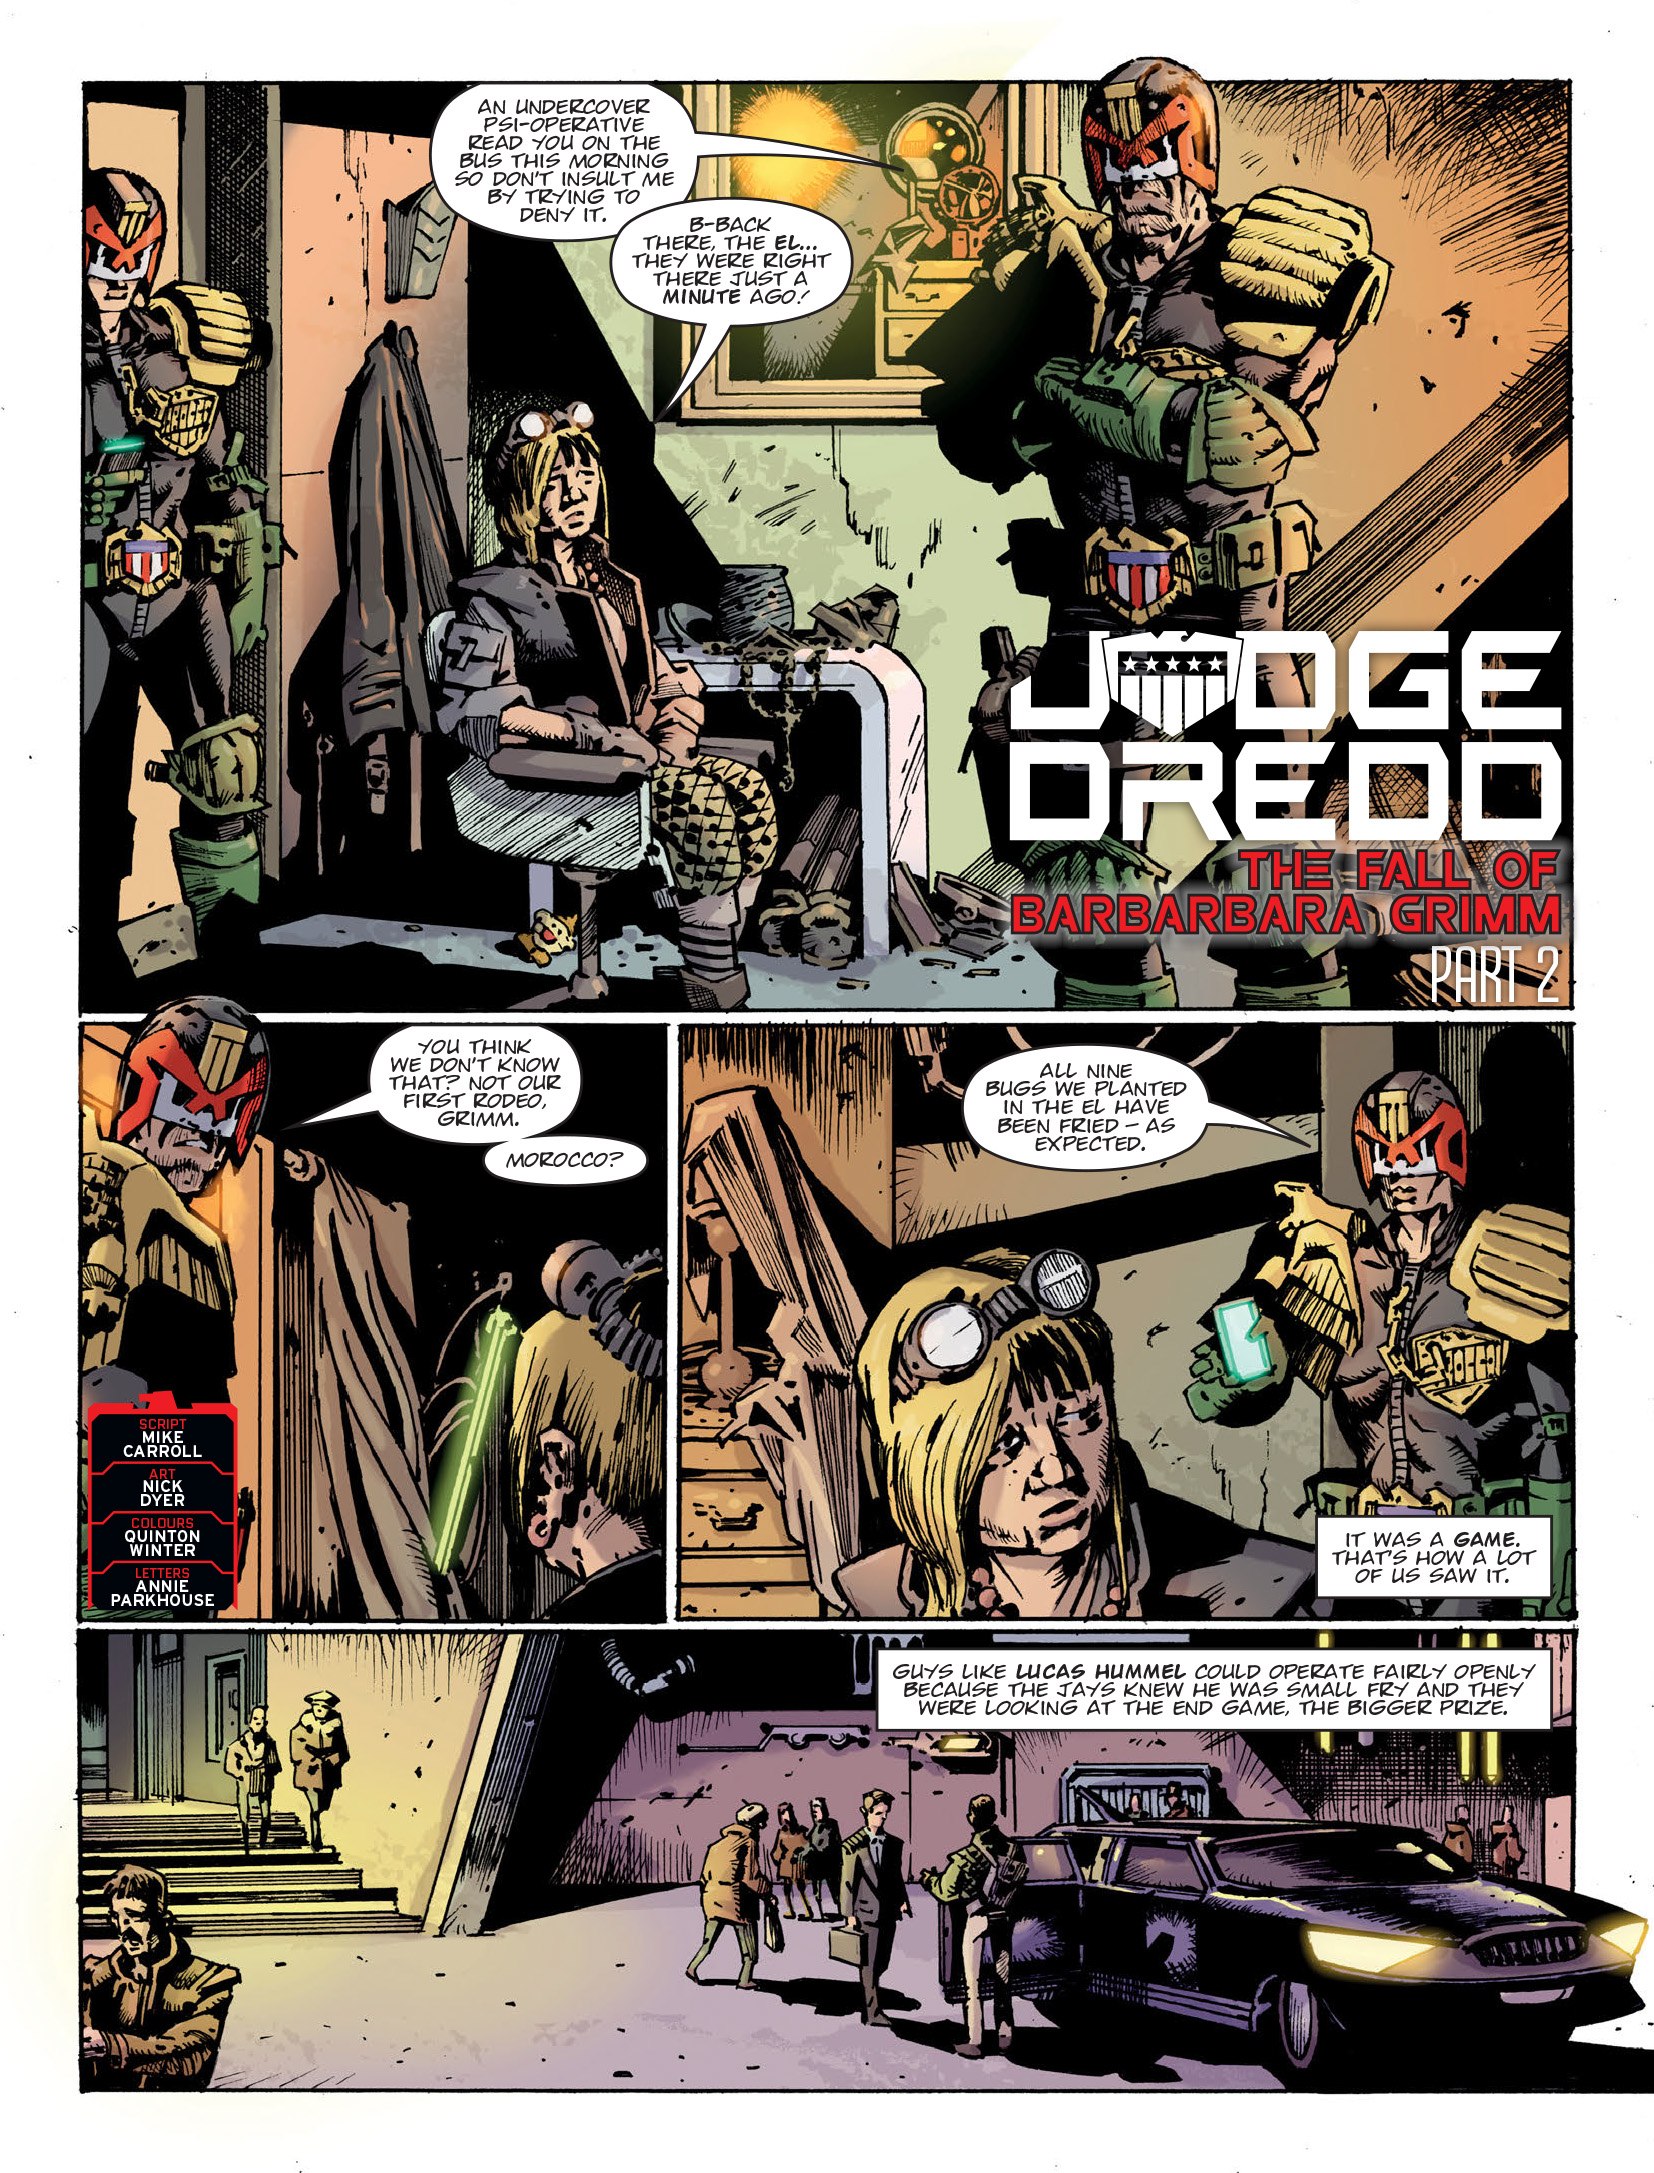 2000 AD: Chapter 2147 - Page 3